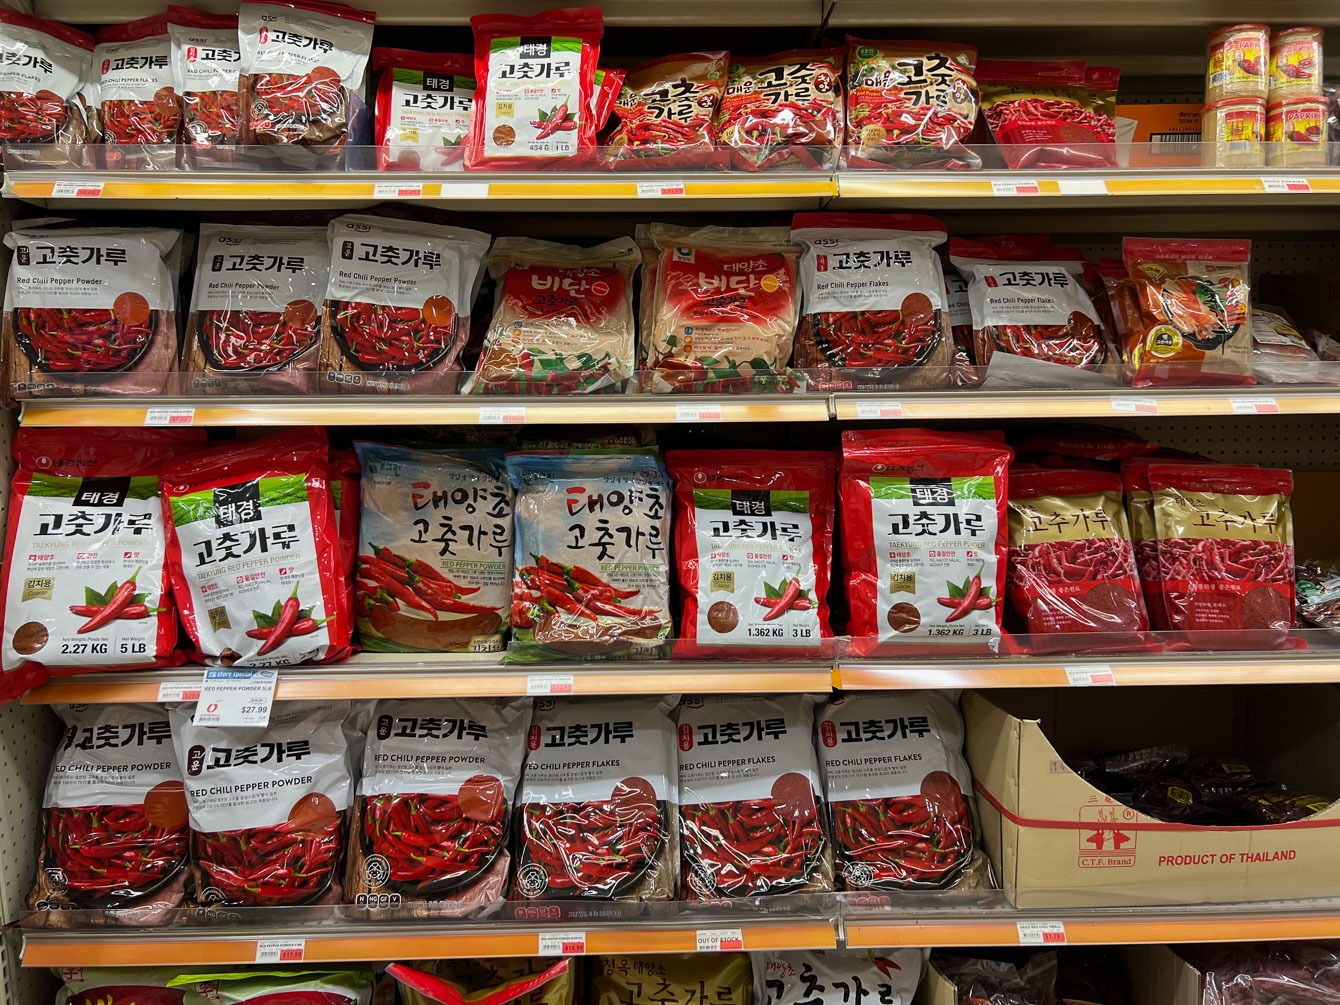 A variety of Korean chili flakes are displayed on the shelf